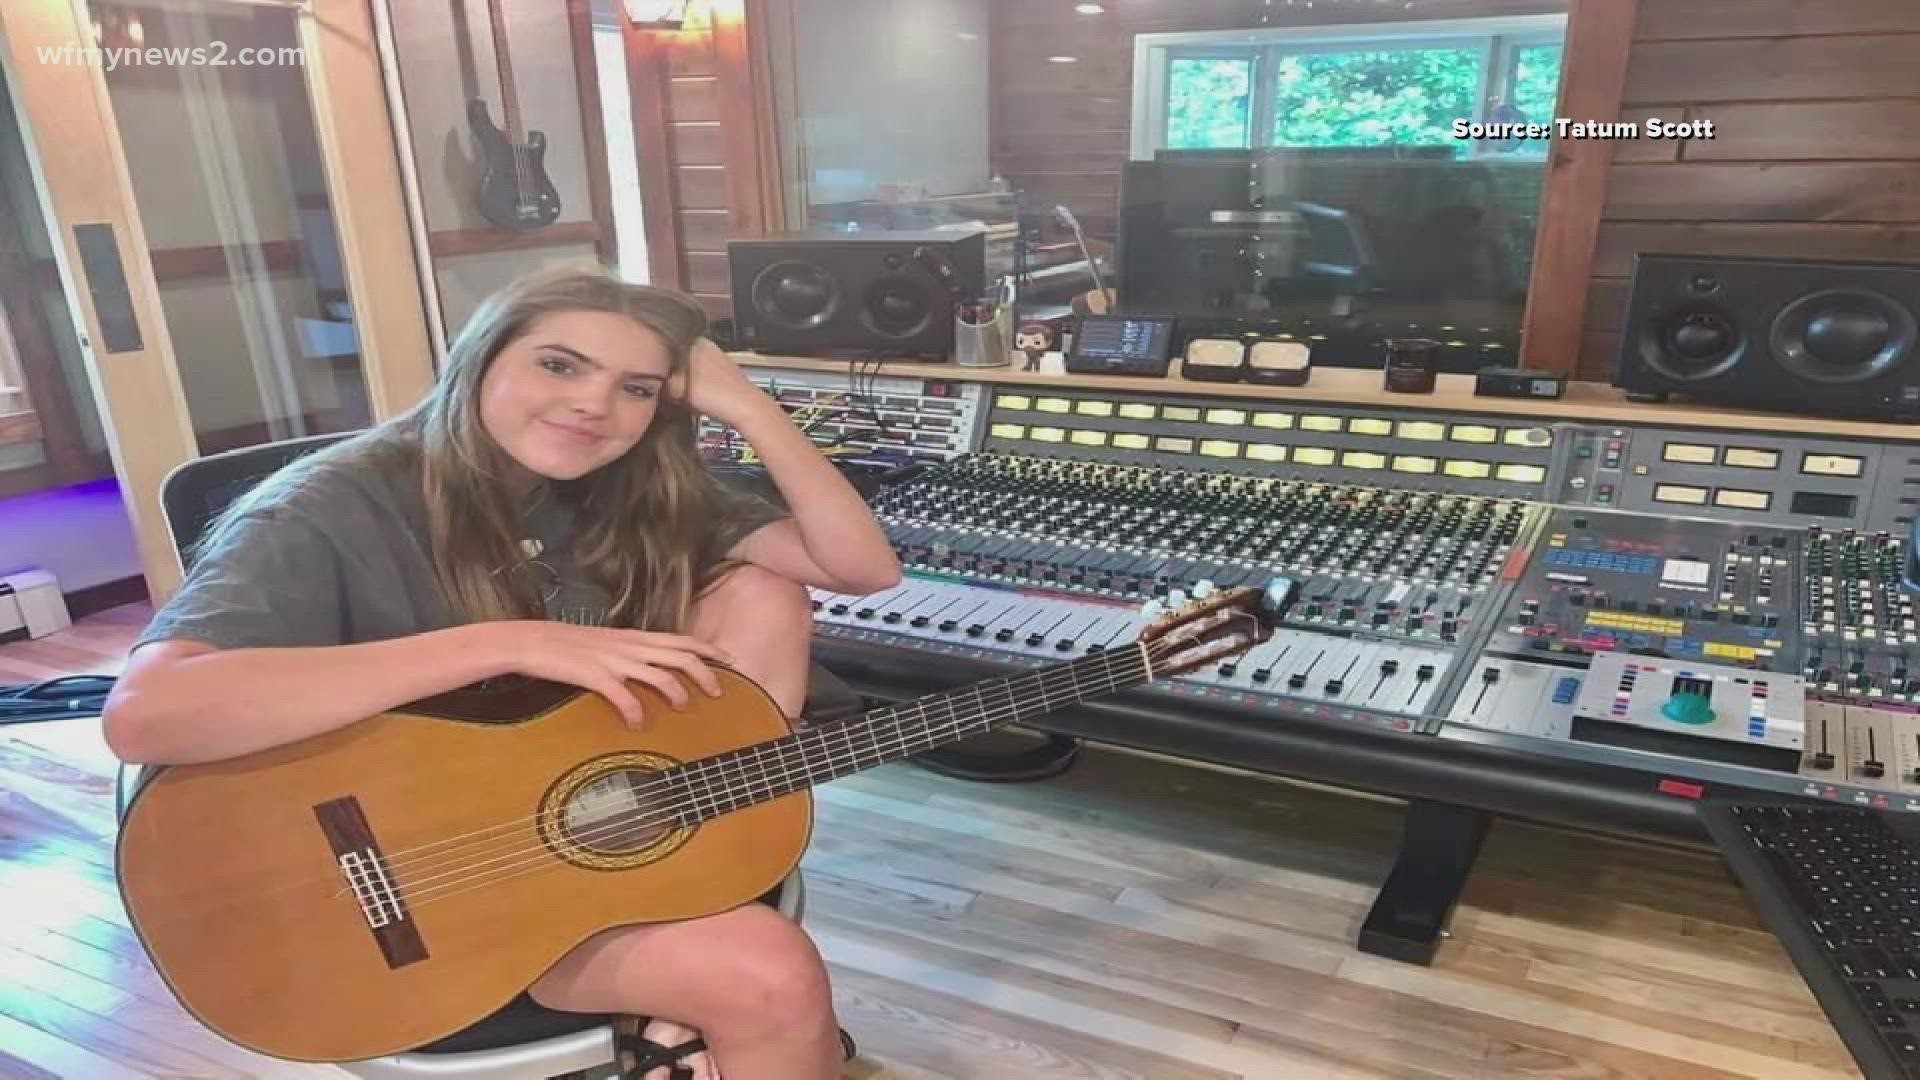 Tatum Scott is a young Triad singer and songwriter celebrating a recent song release.